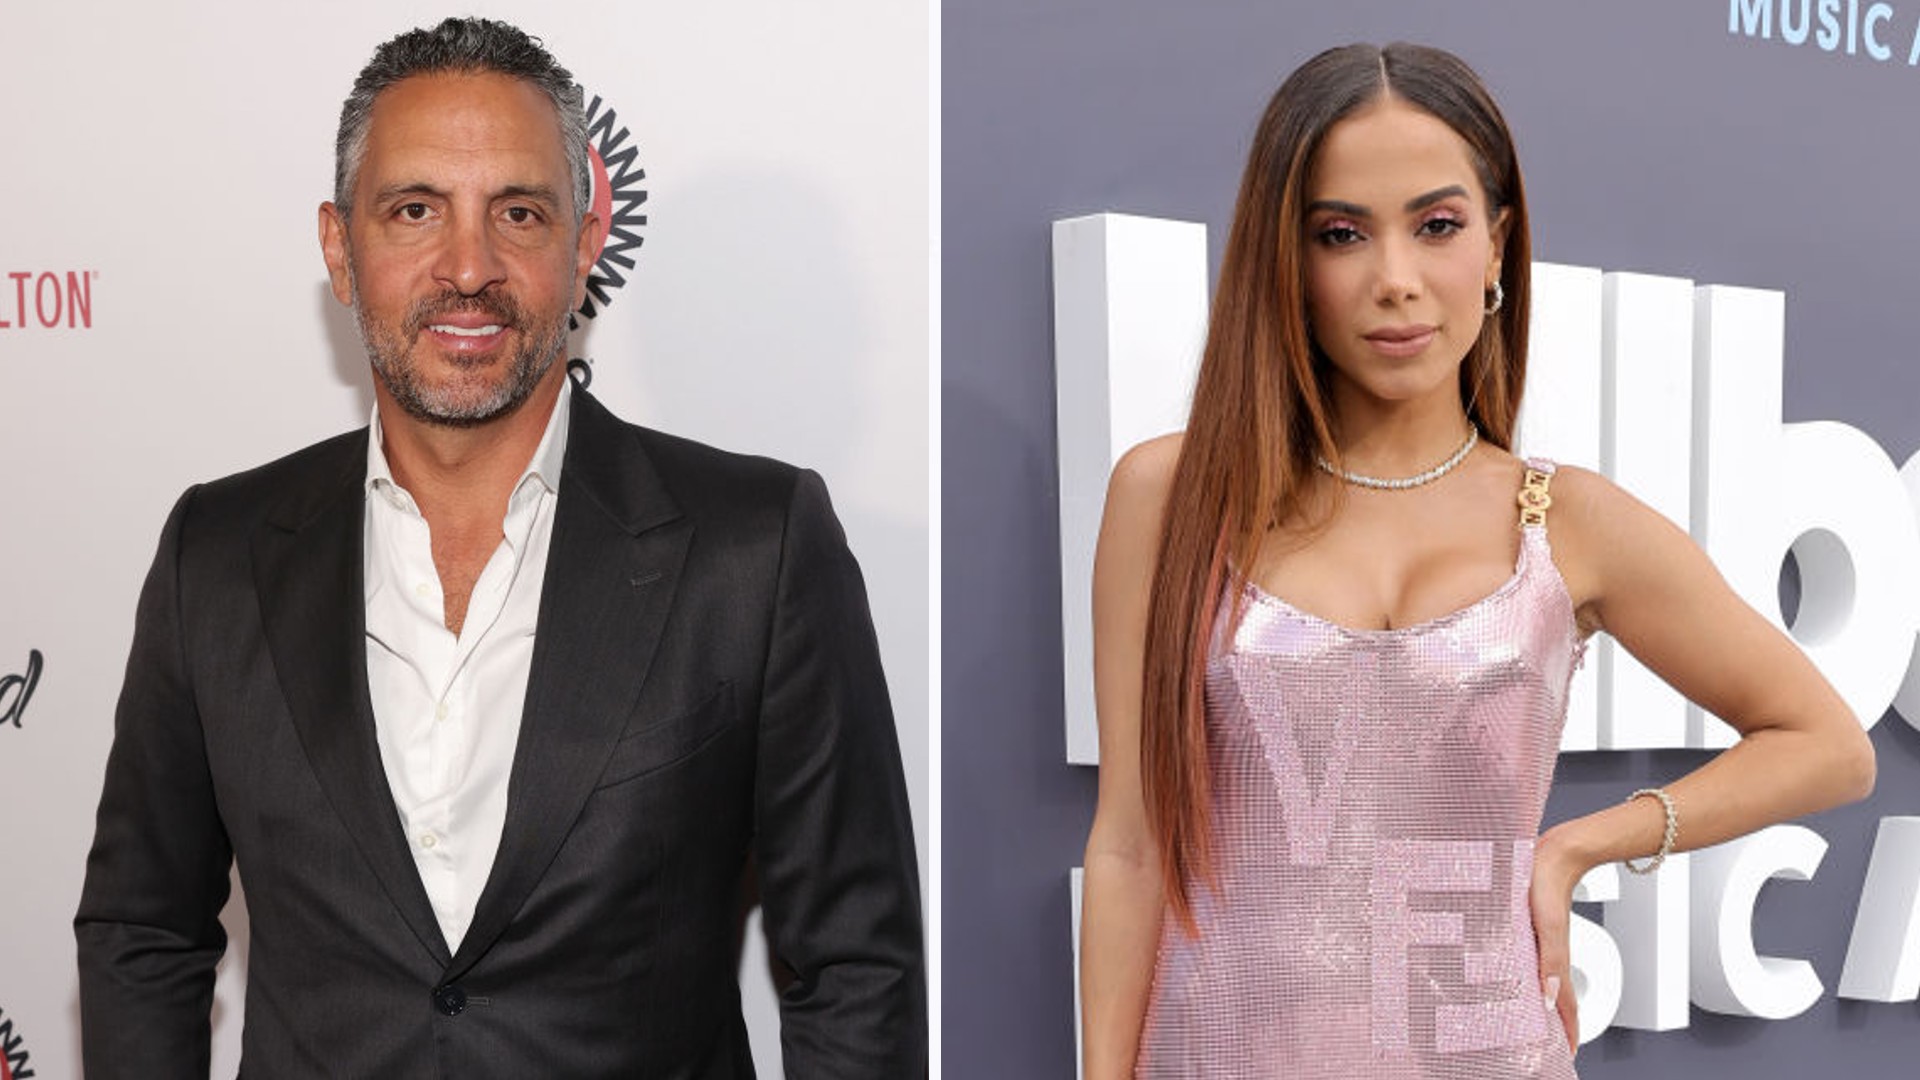 Living His Best Life! Watch Mauricio Umansky Dance On Tables While Partying With Singer Anitta In Aspen (Video) thumbnail